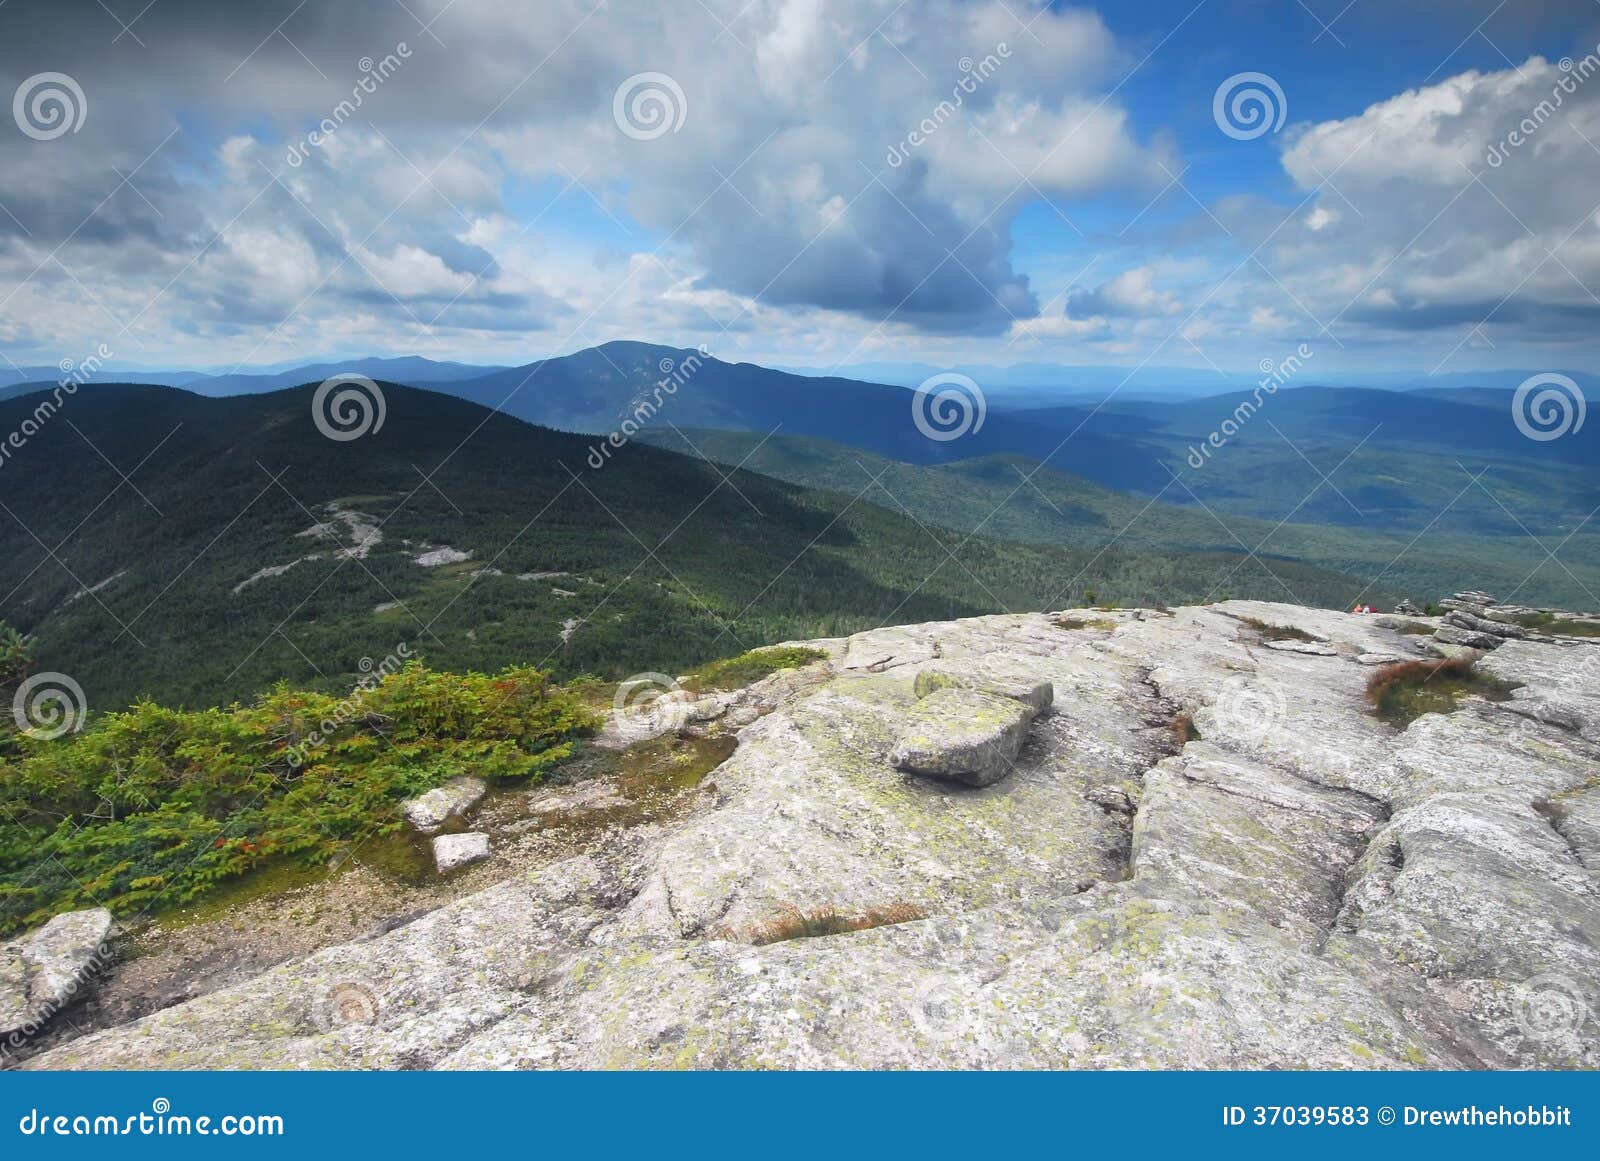 grafton notch state park in maine